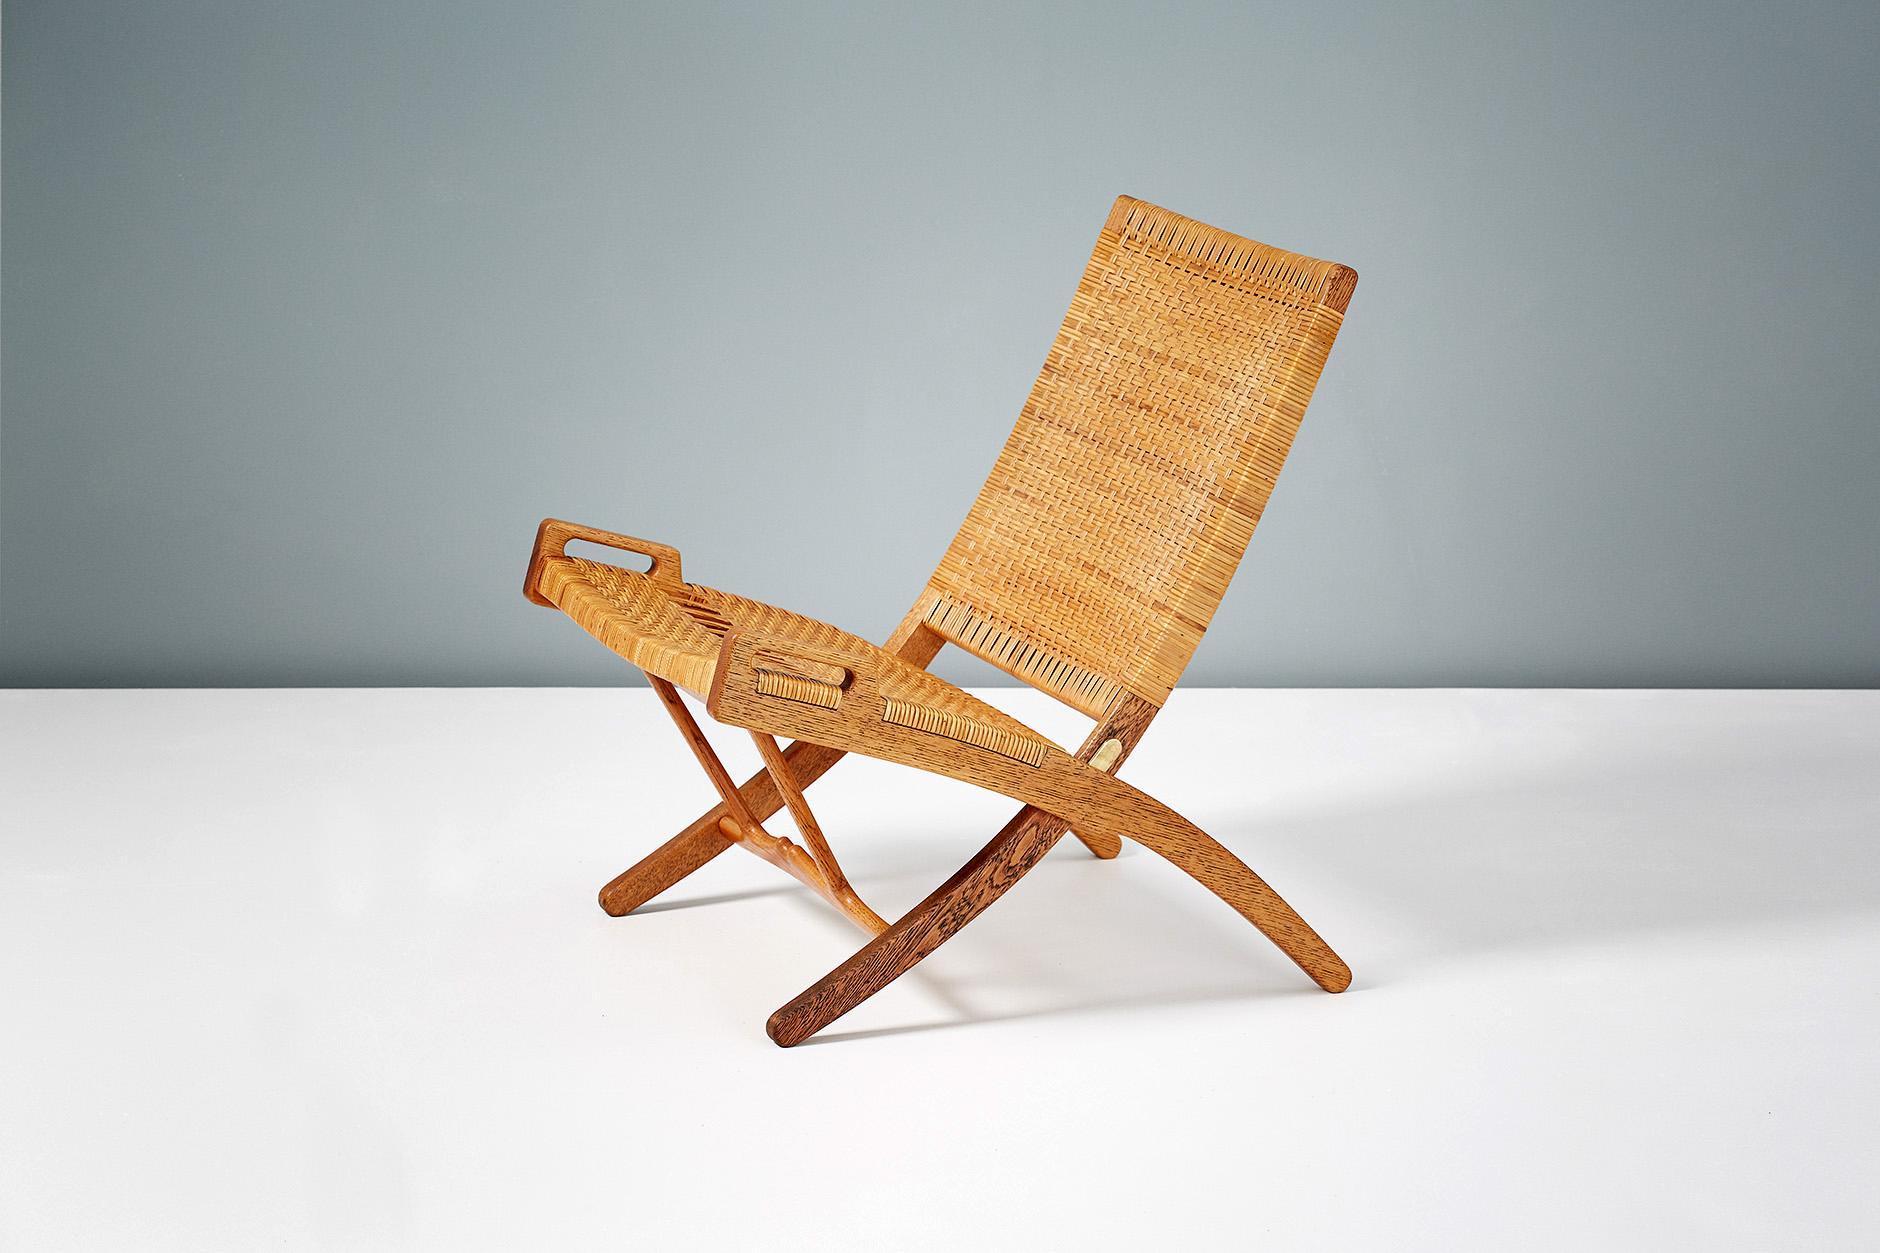 One of Danish master Hans J. Wegner's most important and iconic works. The model 512 chair was produced by master cabinetmaker Johannes Hansen in Copenhagen during their golden period of collaboration that also produced the China chair, Wishbone